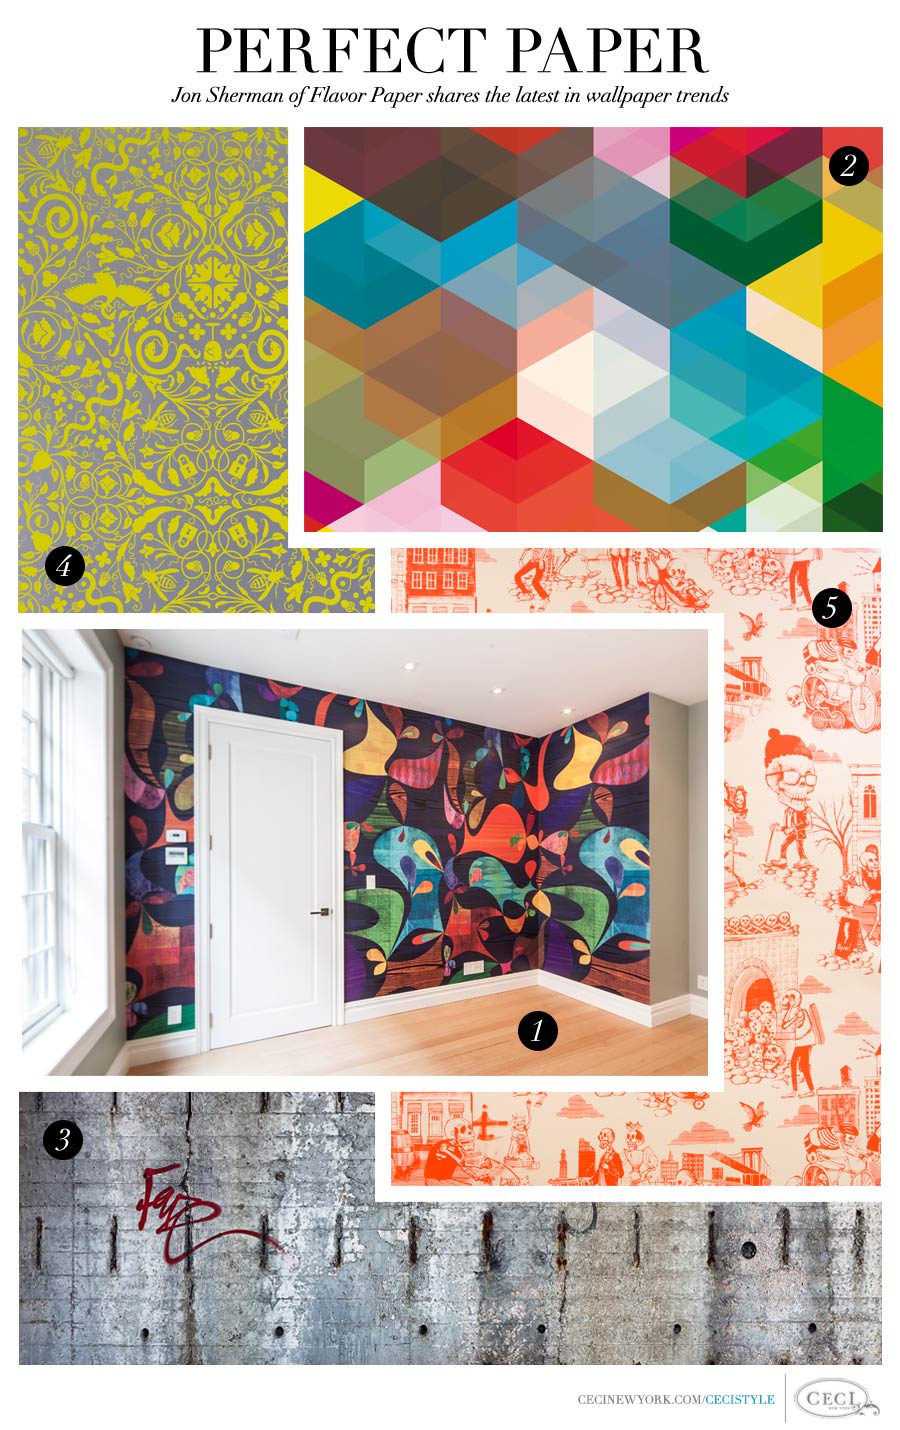 Jon Sherman Of Flavor Paper Shares The In Wallpaper Trends